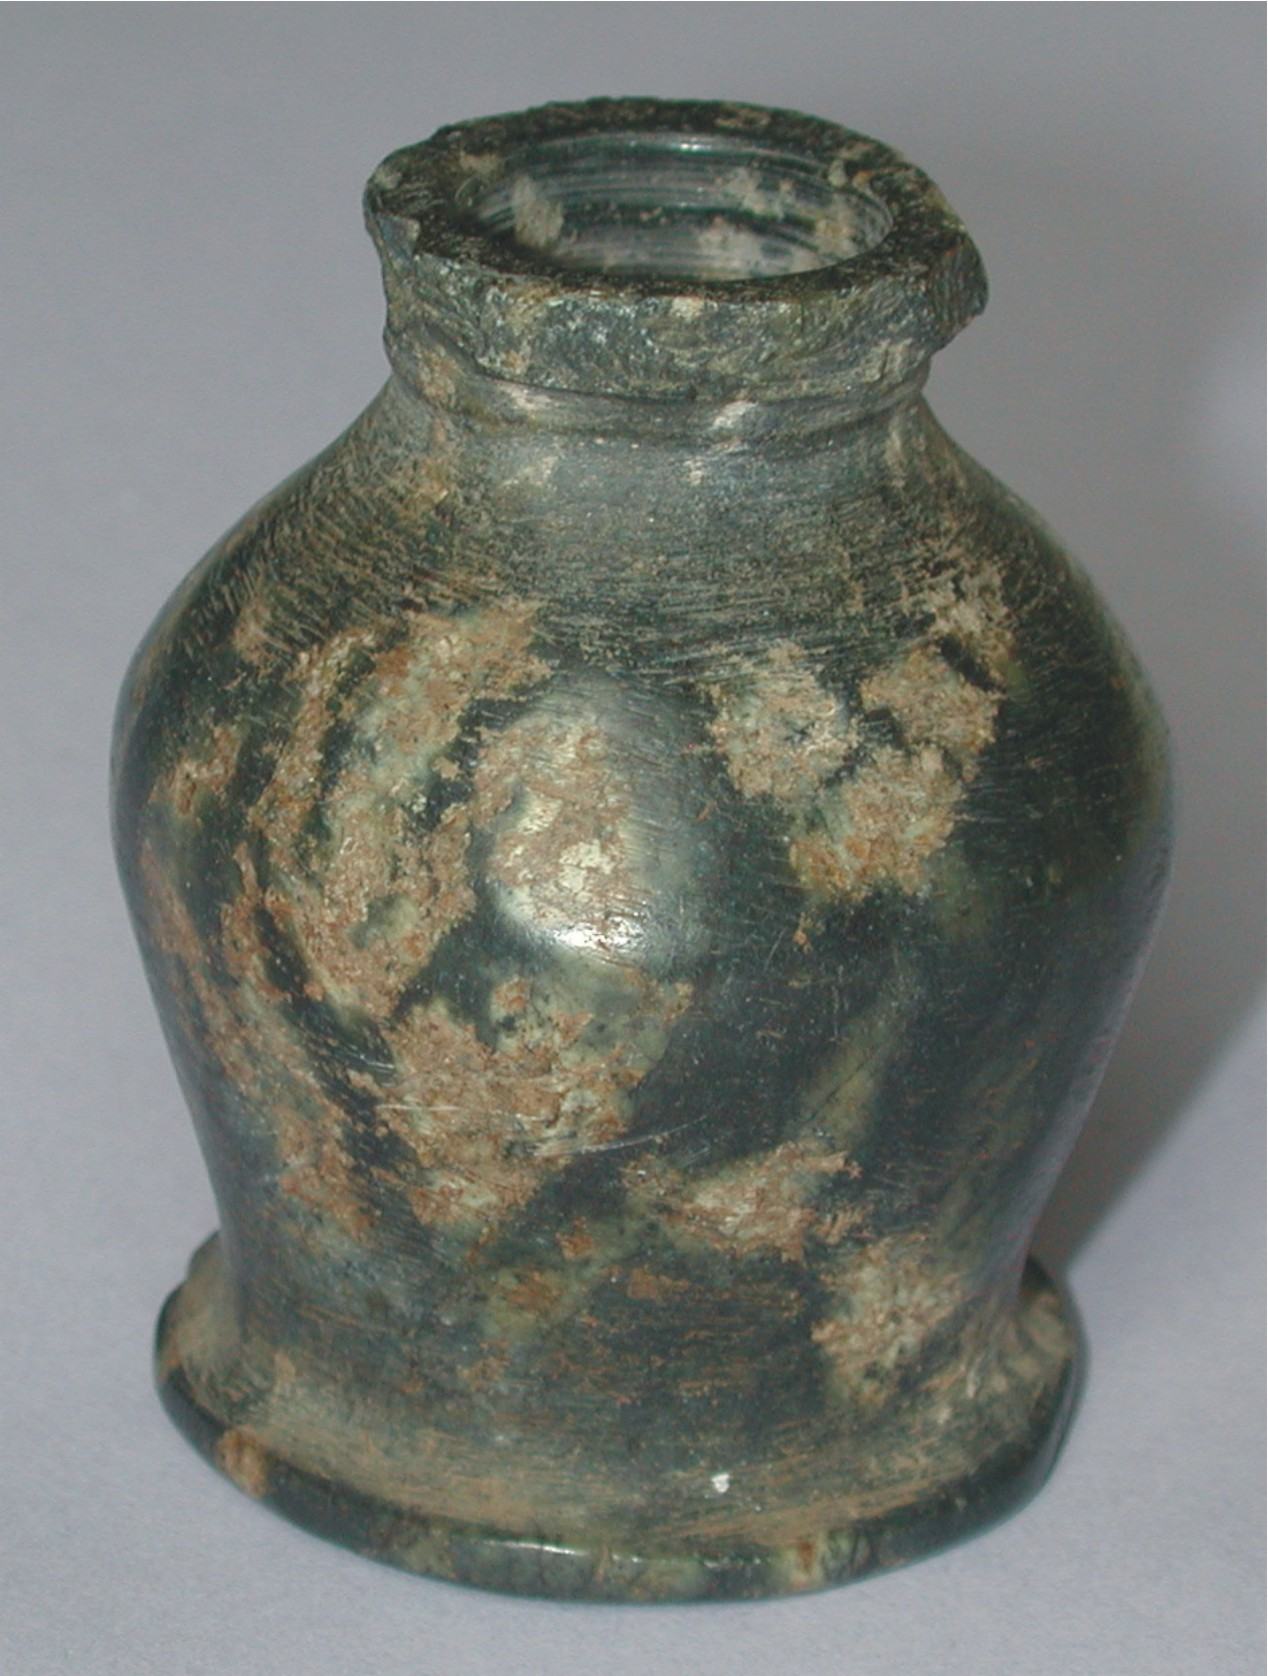 Image for: Serpentine cosmetic jar